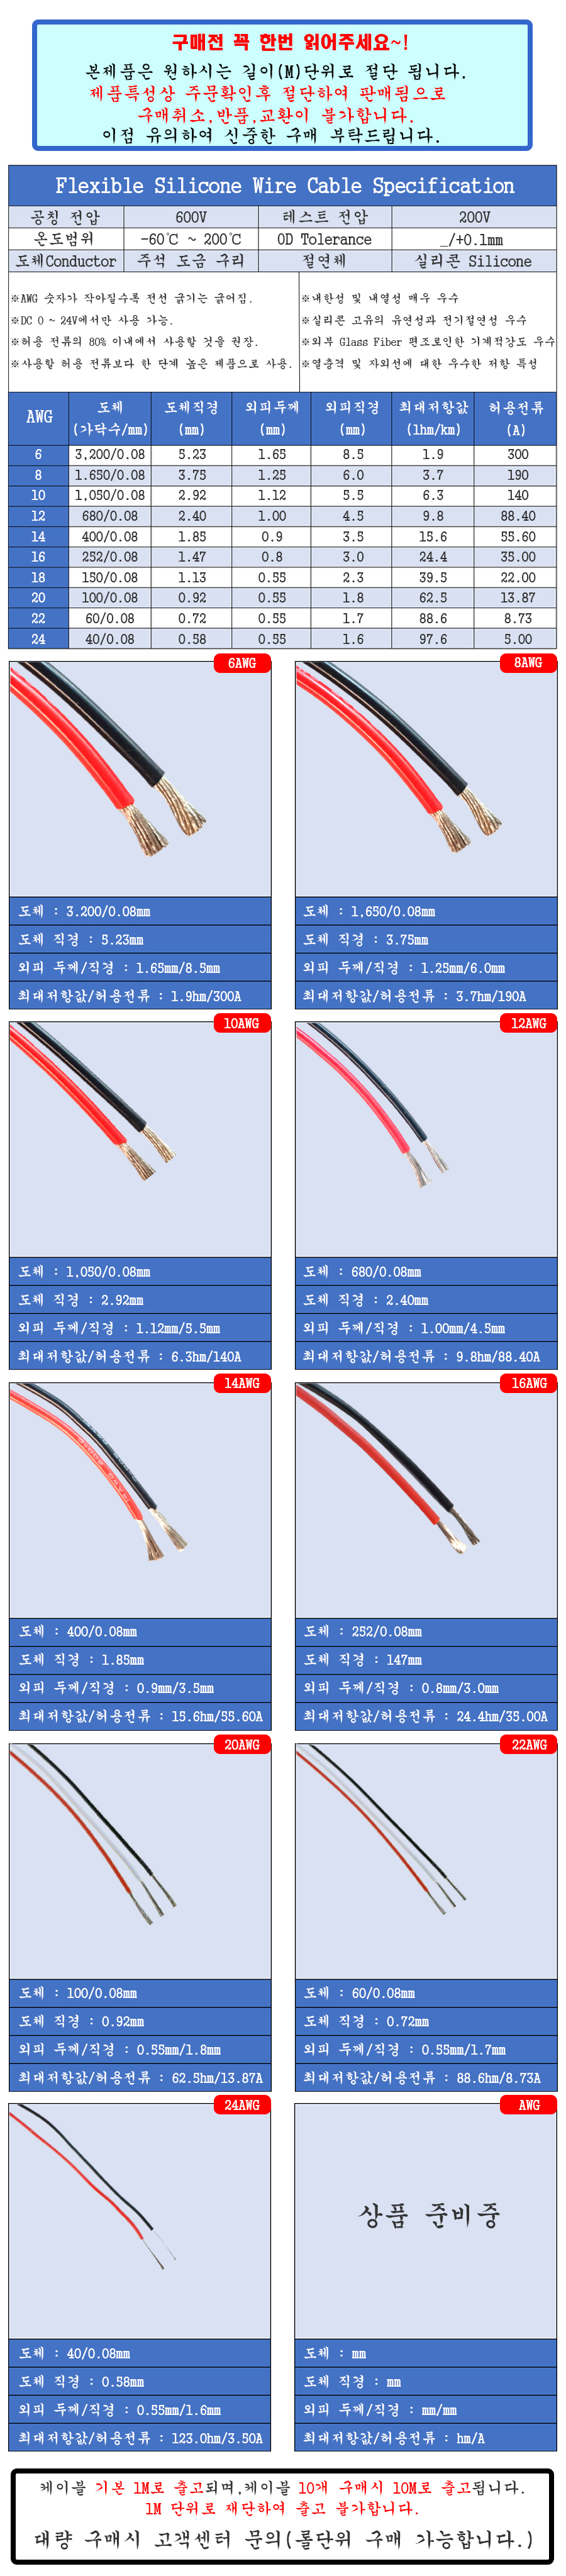 Silicone-Cable-Details-1.jpg